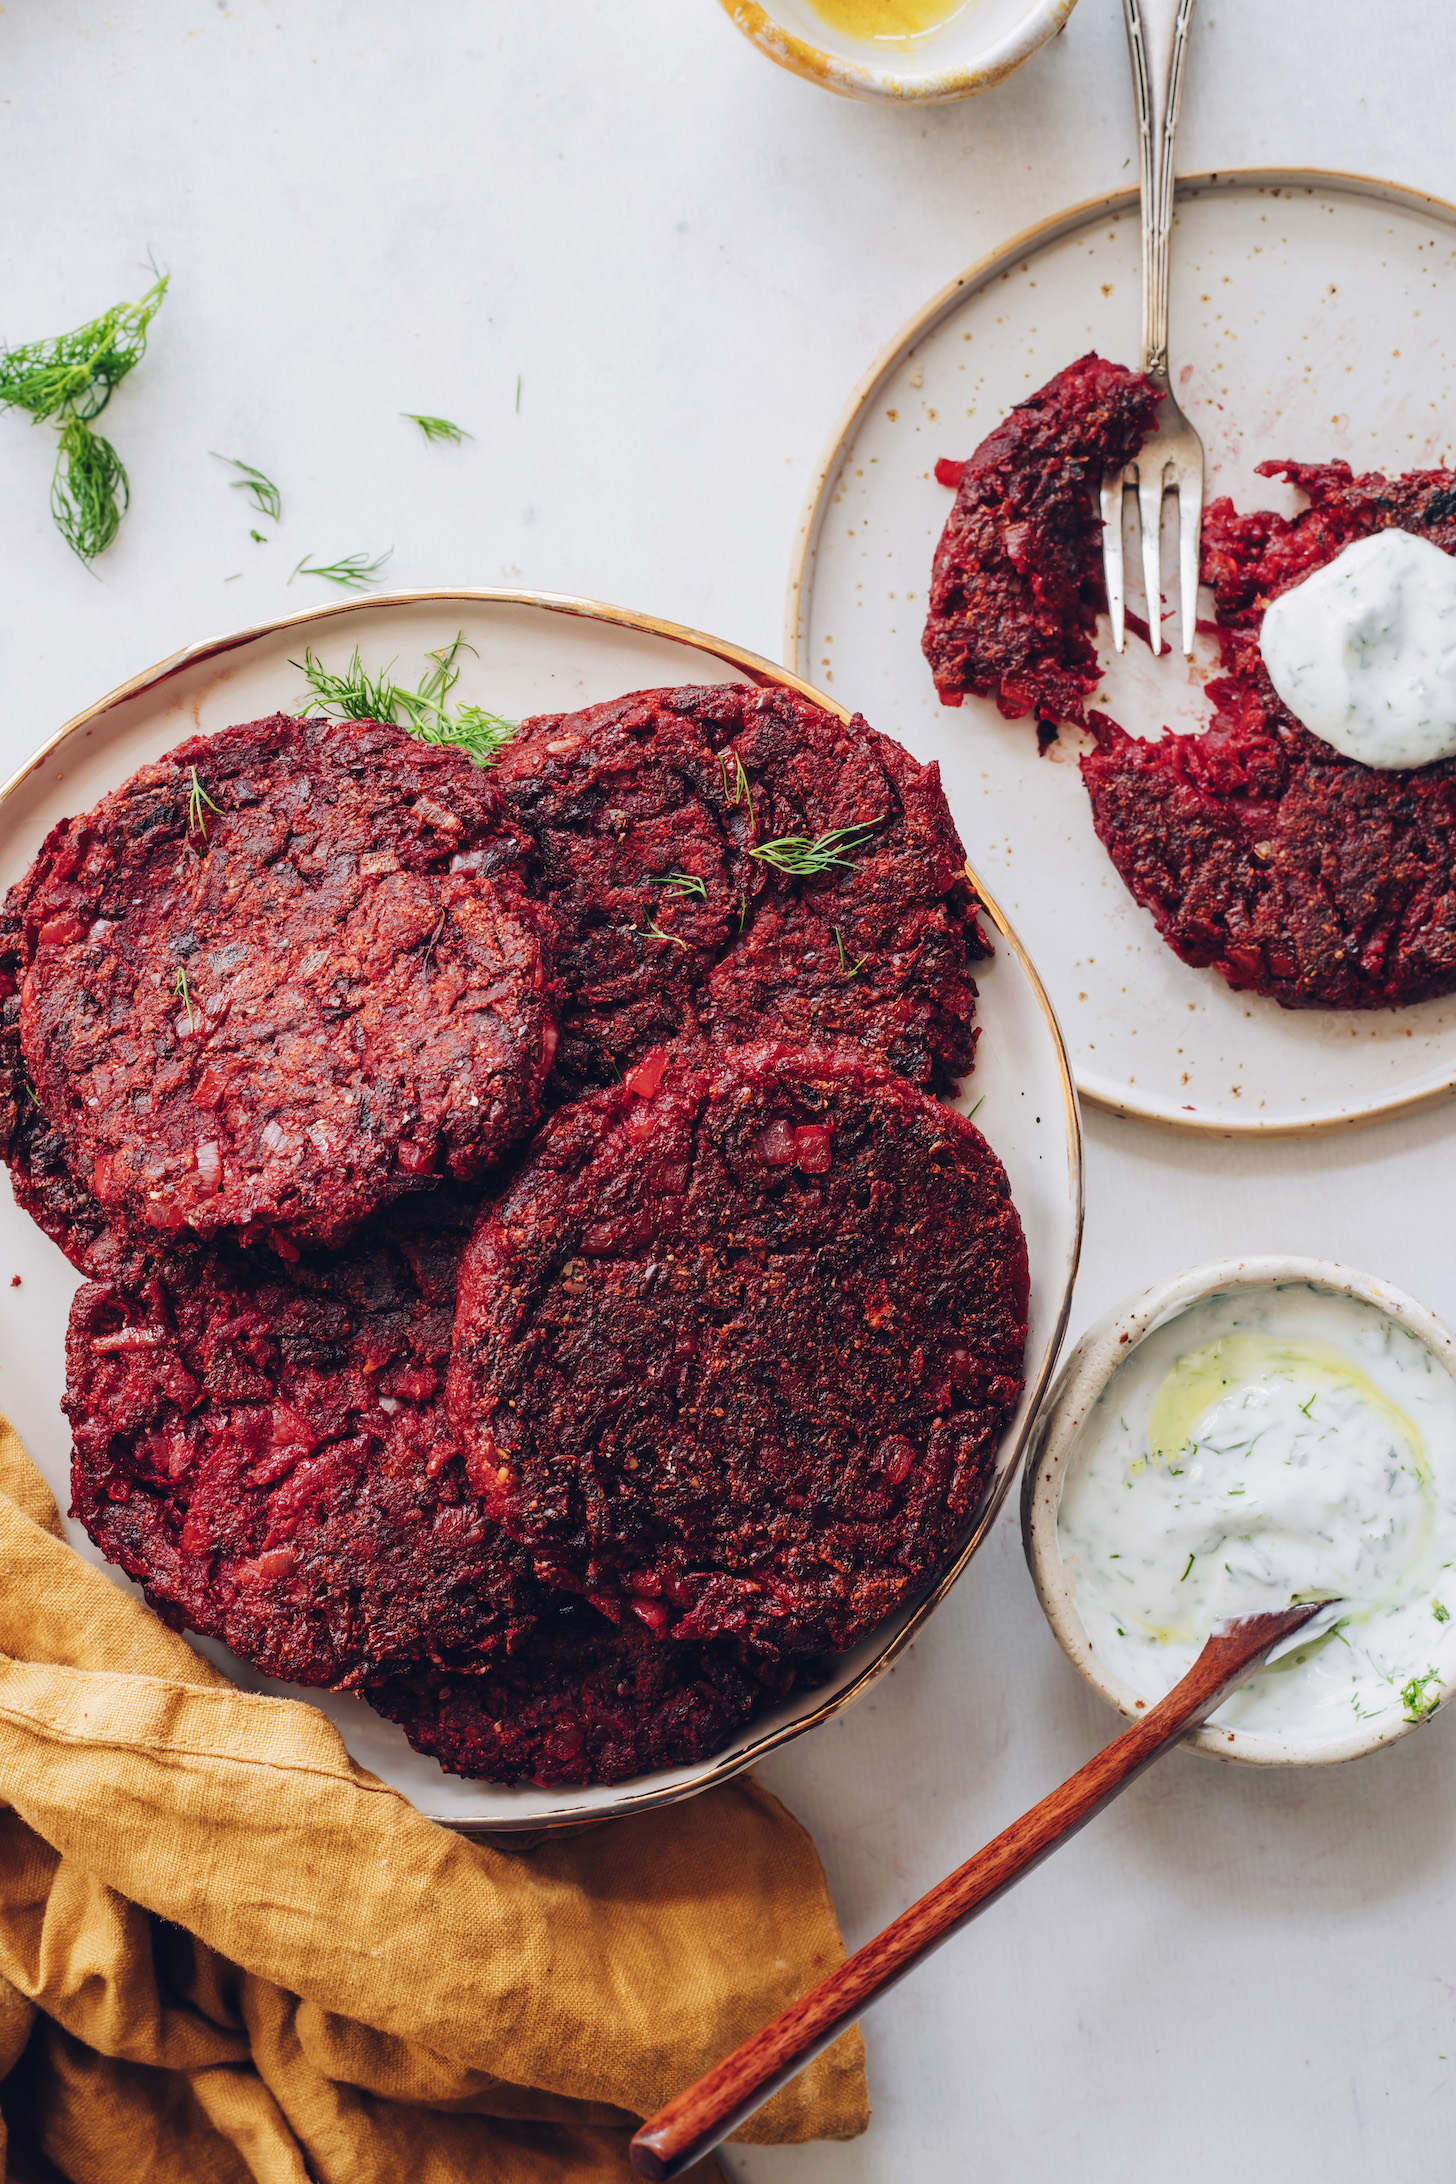 Plates of beet fritters with dill yogurt sauce on top and in a bowl on the side